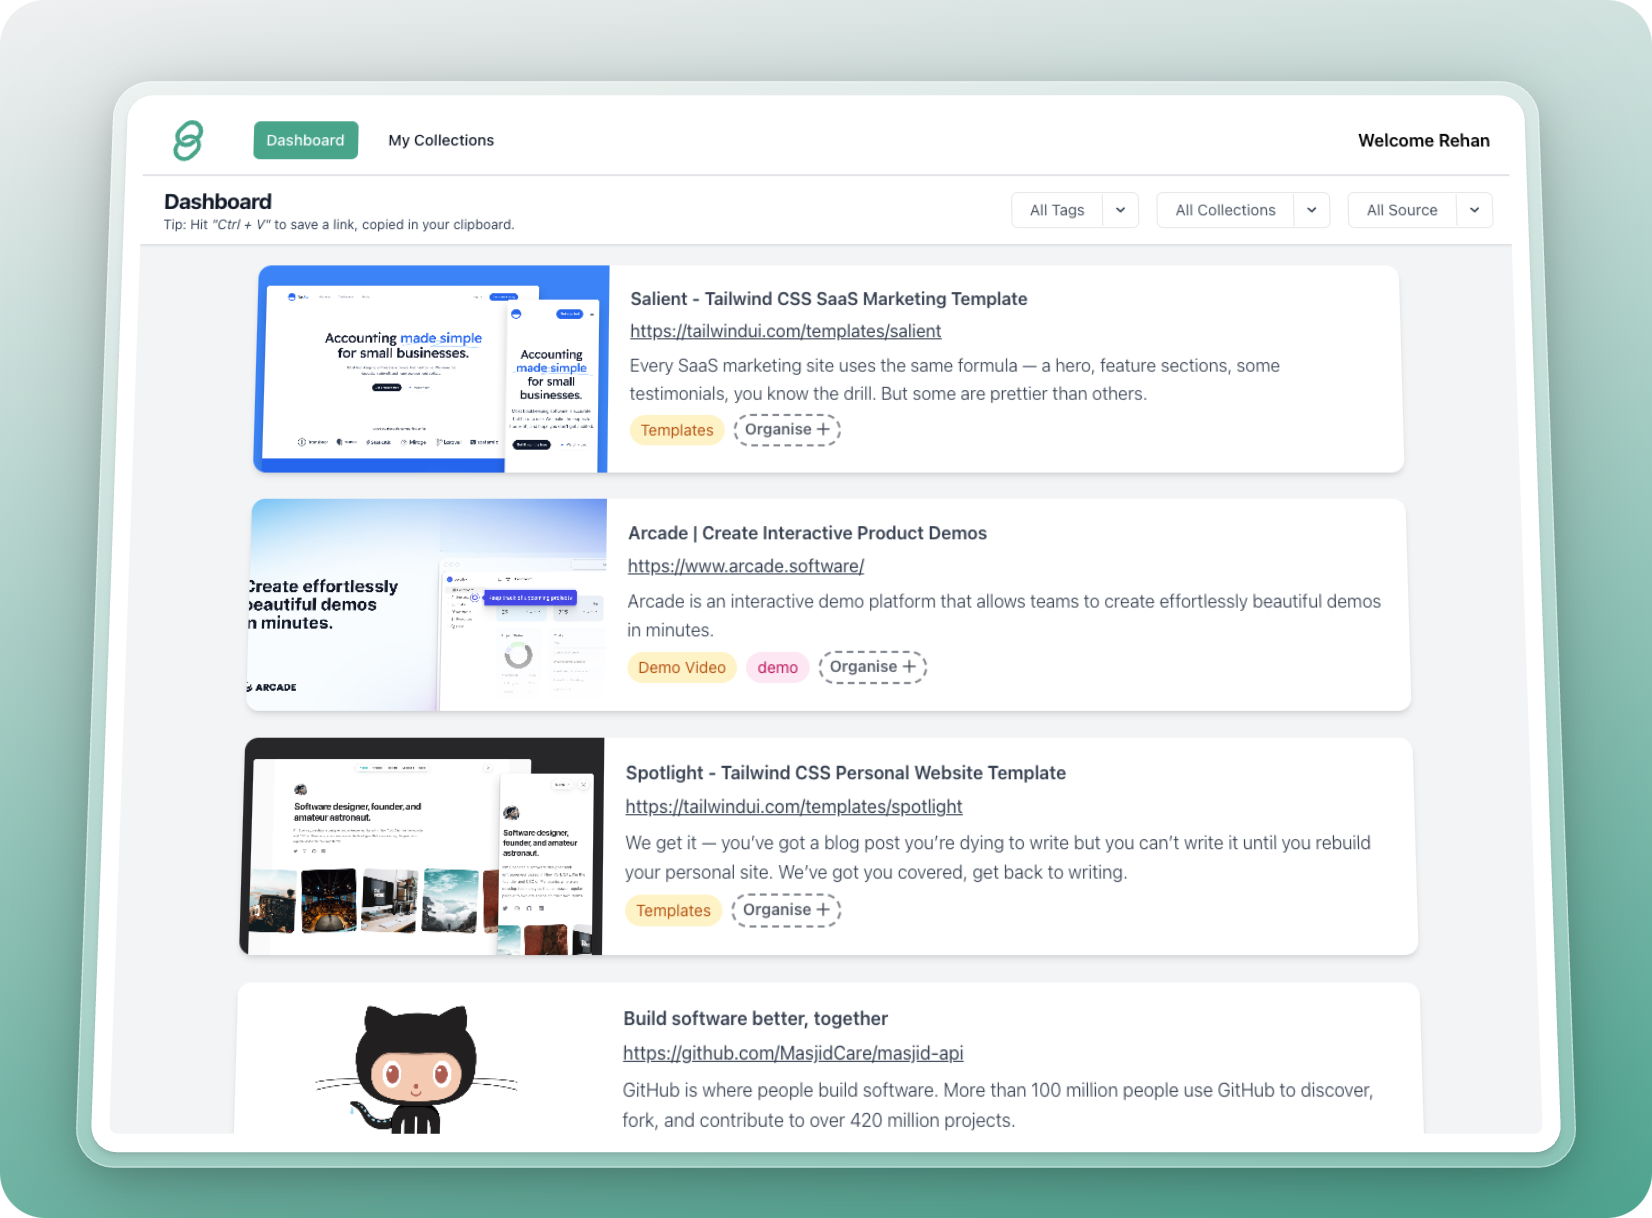 Dashboard Showcase - Organise & Share your links from all your Socia Media Apps